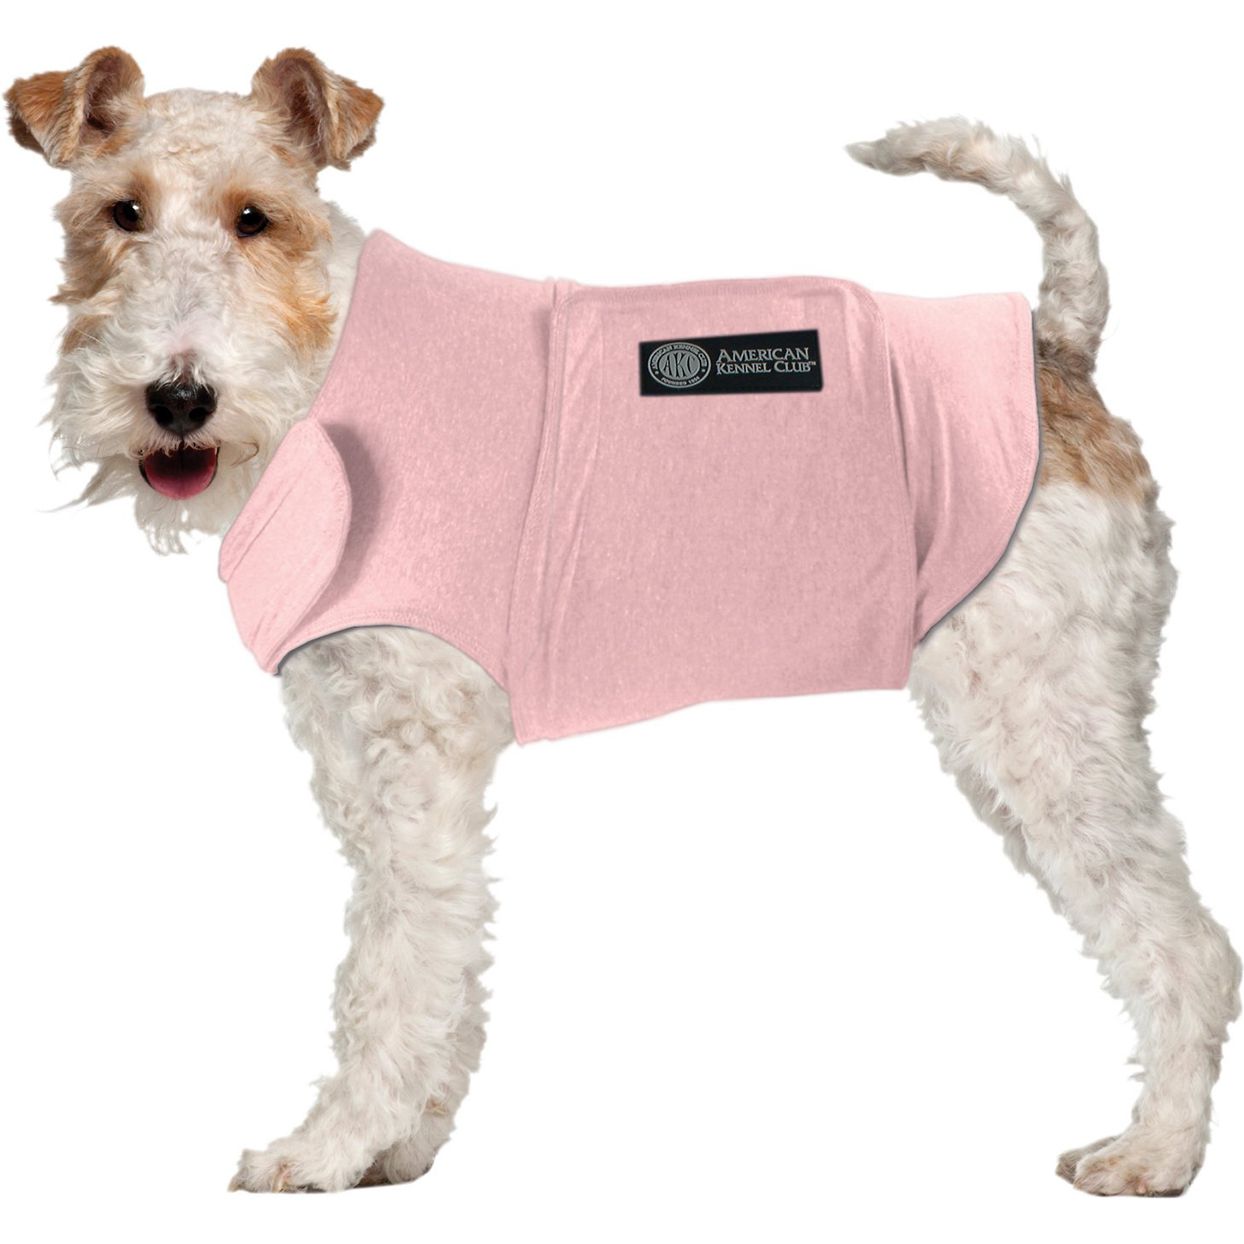 A Thunder Shirt for Dogs Could Help Summer Storm Anxiety—These Are Our Top  Picks | Daily Paws